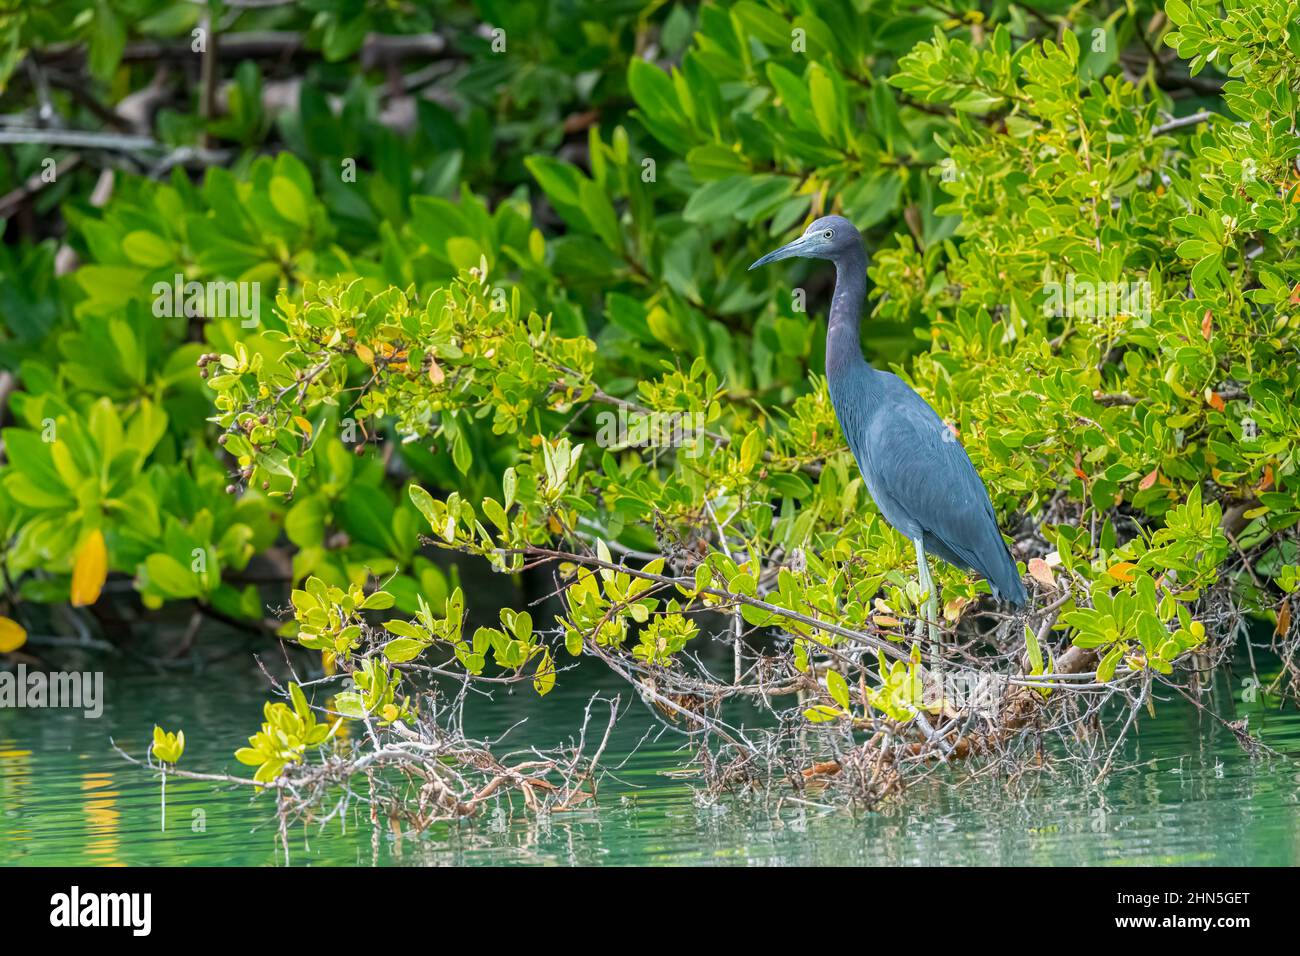 A Little Blue Heron (Egretta caerulea) stands on the water's edge in the Florida Keys, USA. Stock Photo